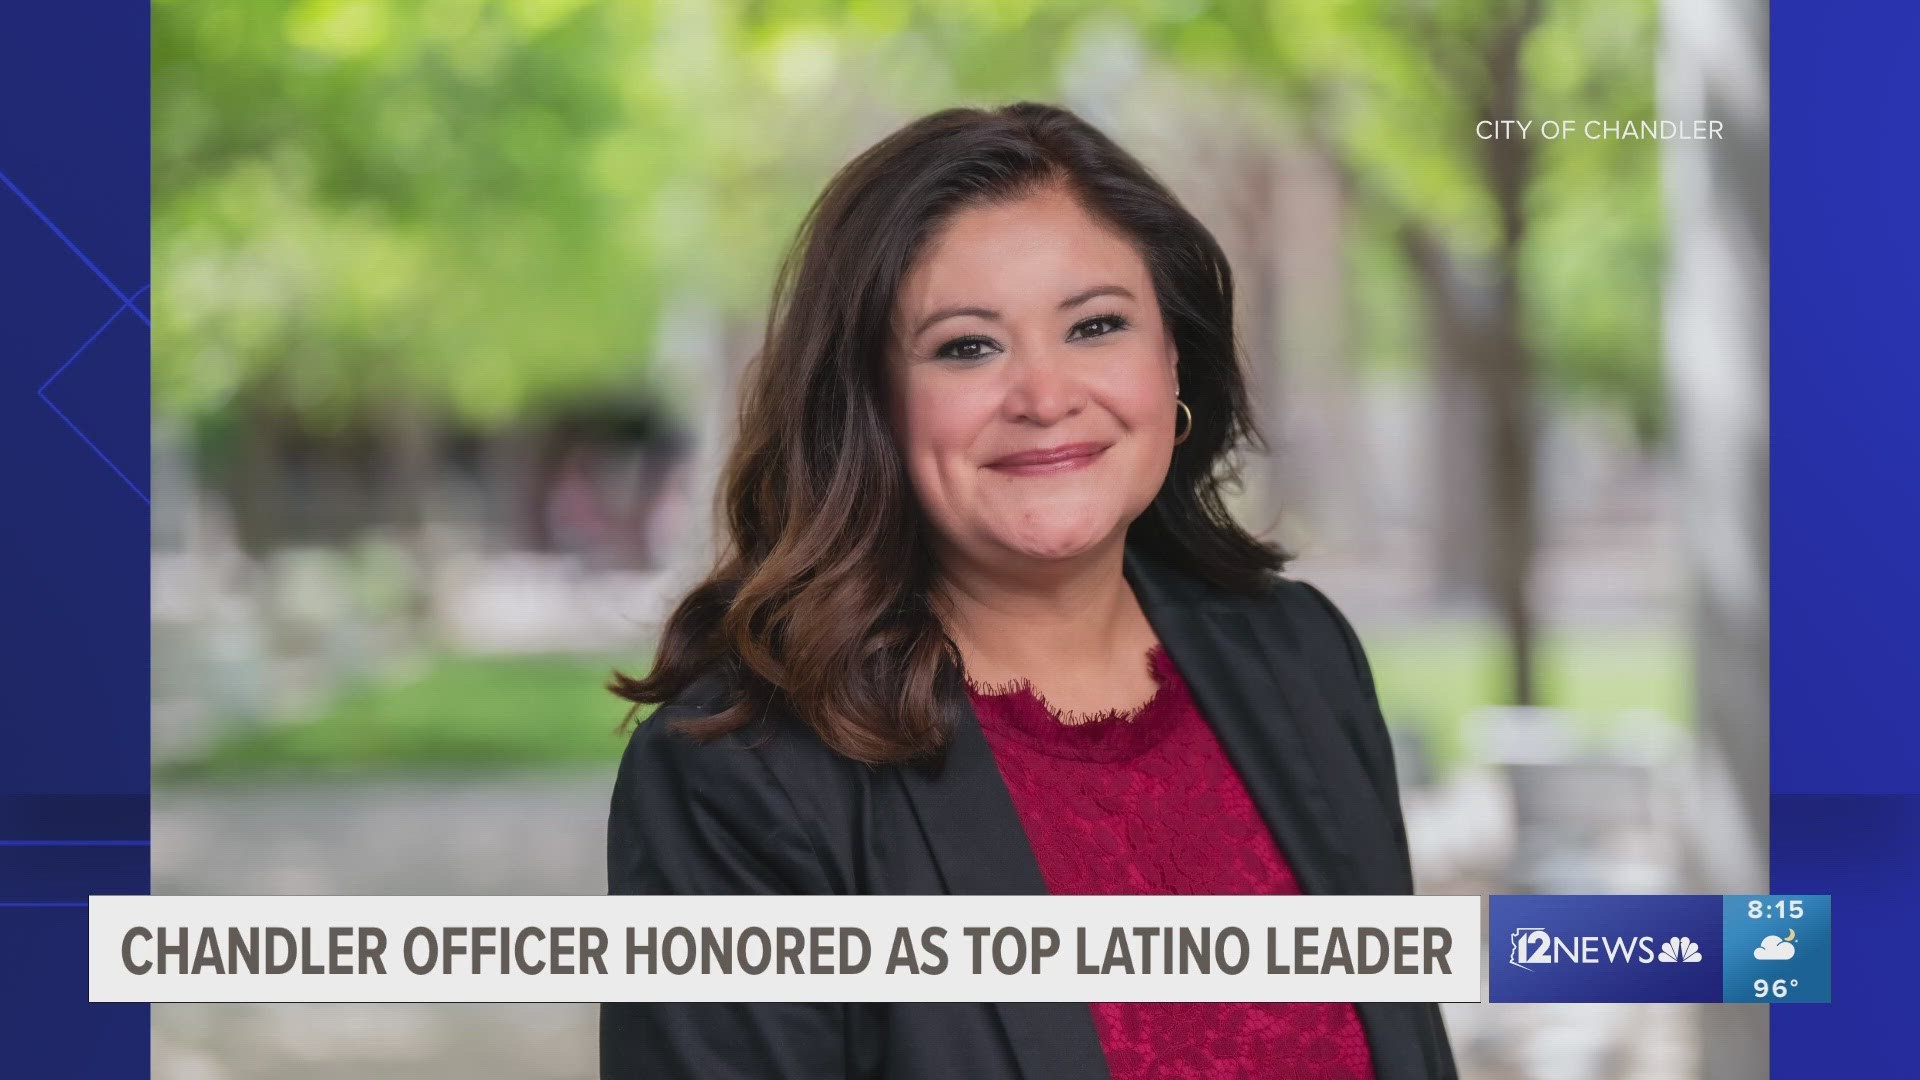 Niki Tapia was honored by the Council for Latino Workplace Equity for her accomplishments throughout a 25 year career working at the City of Chandler.